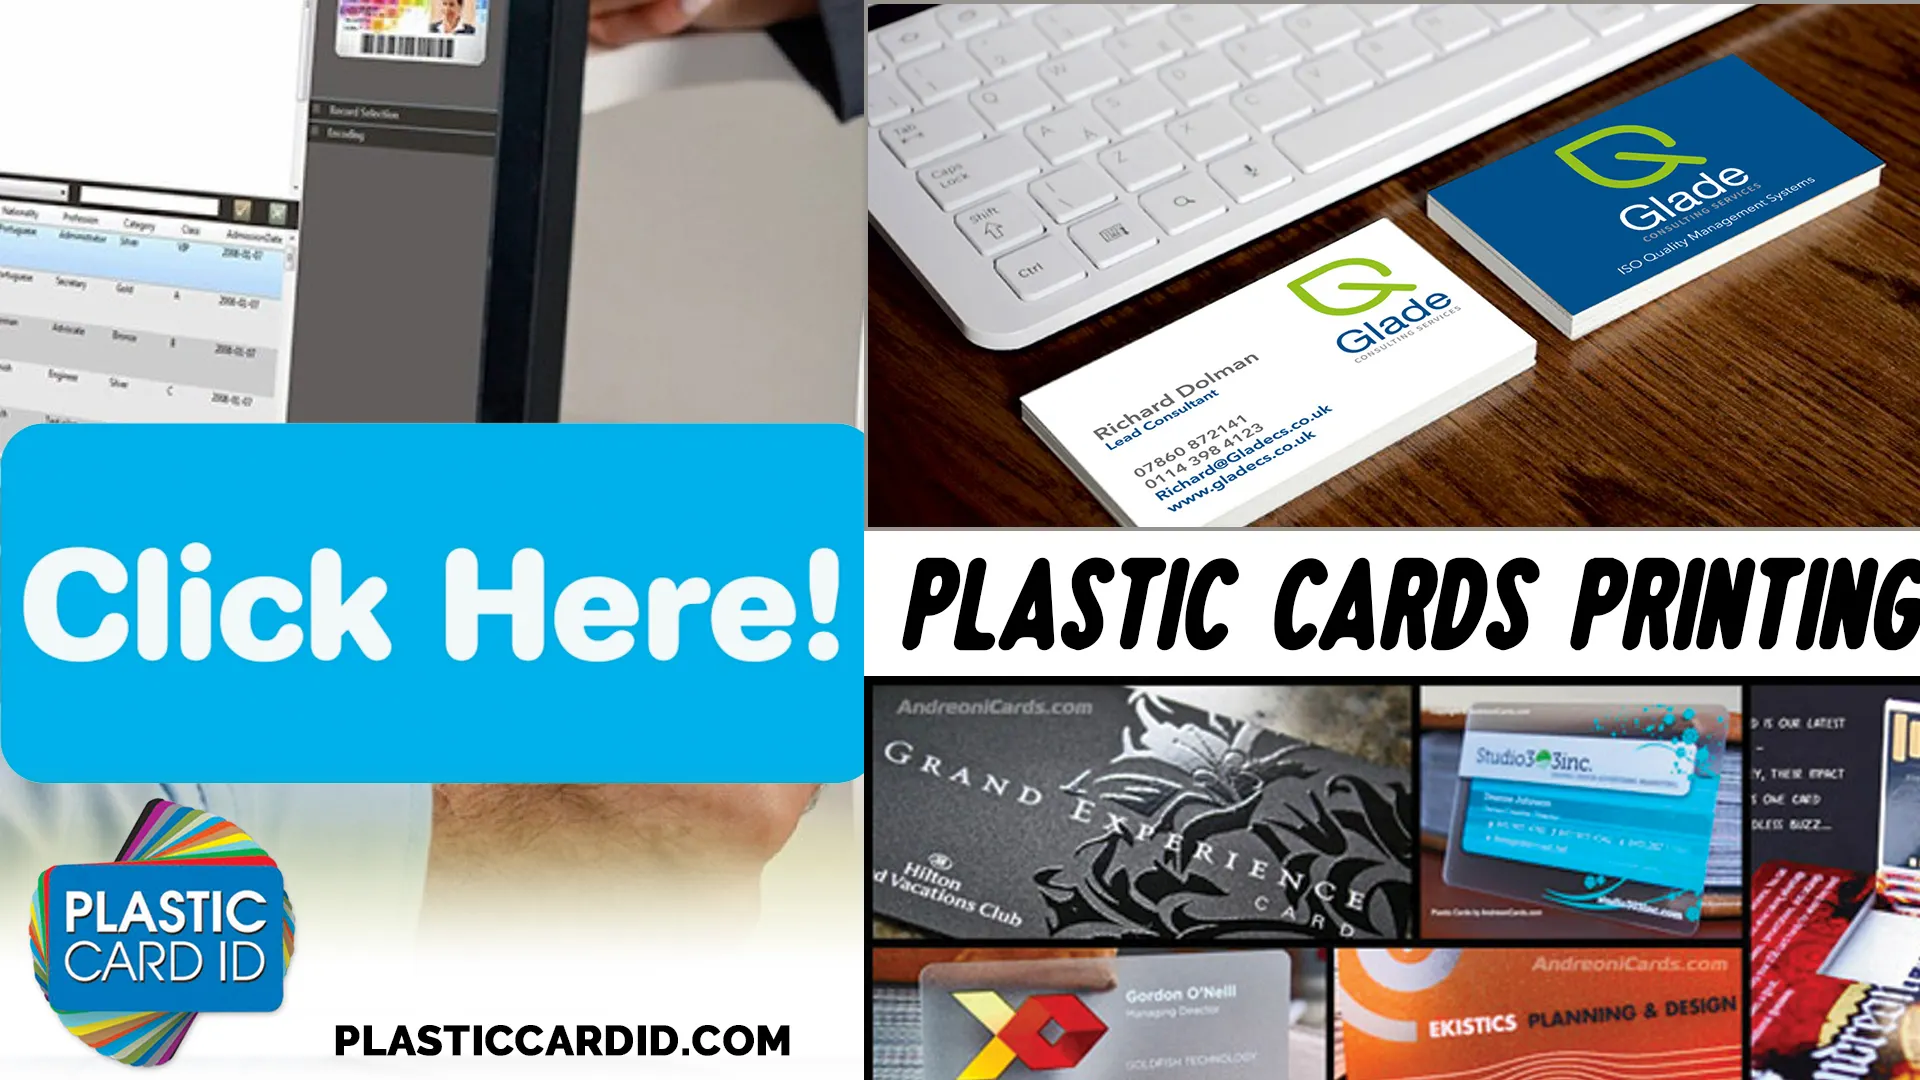 Transforming Brand Perception with Plastic Cards